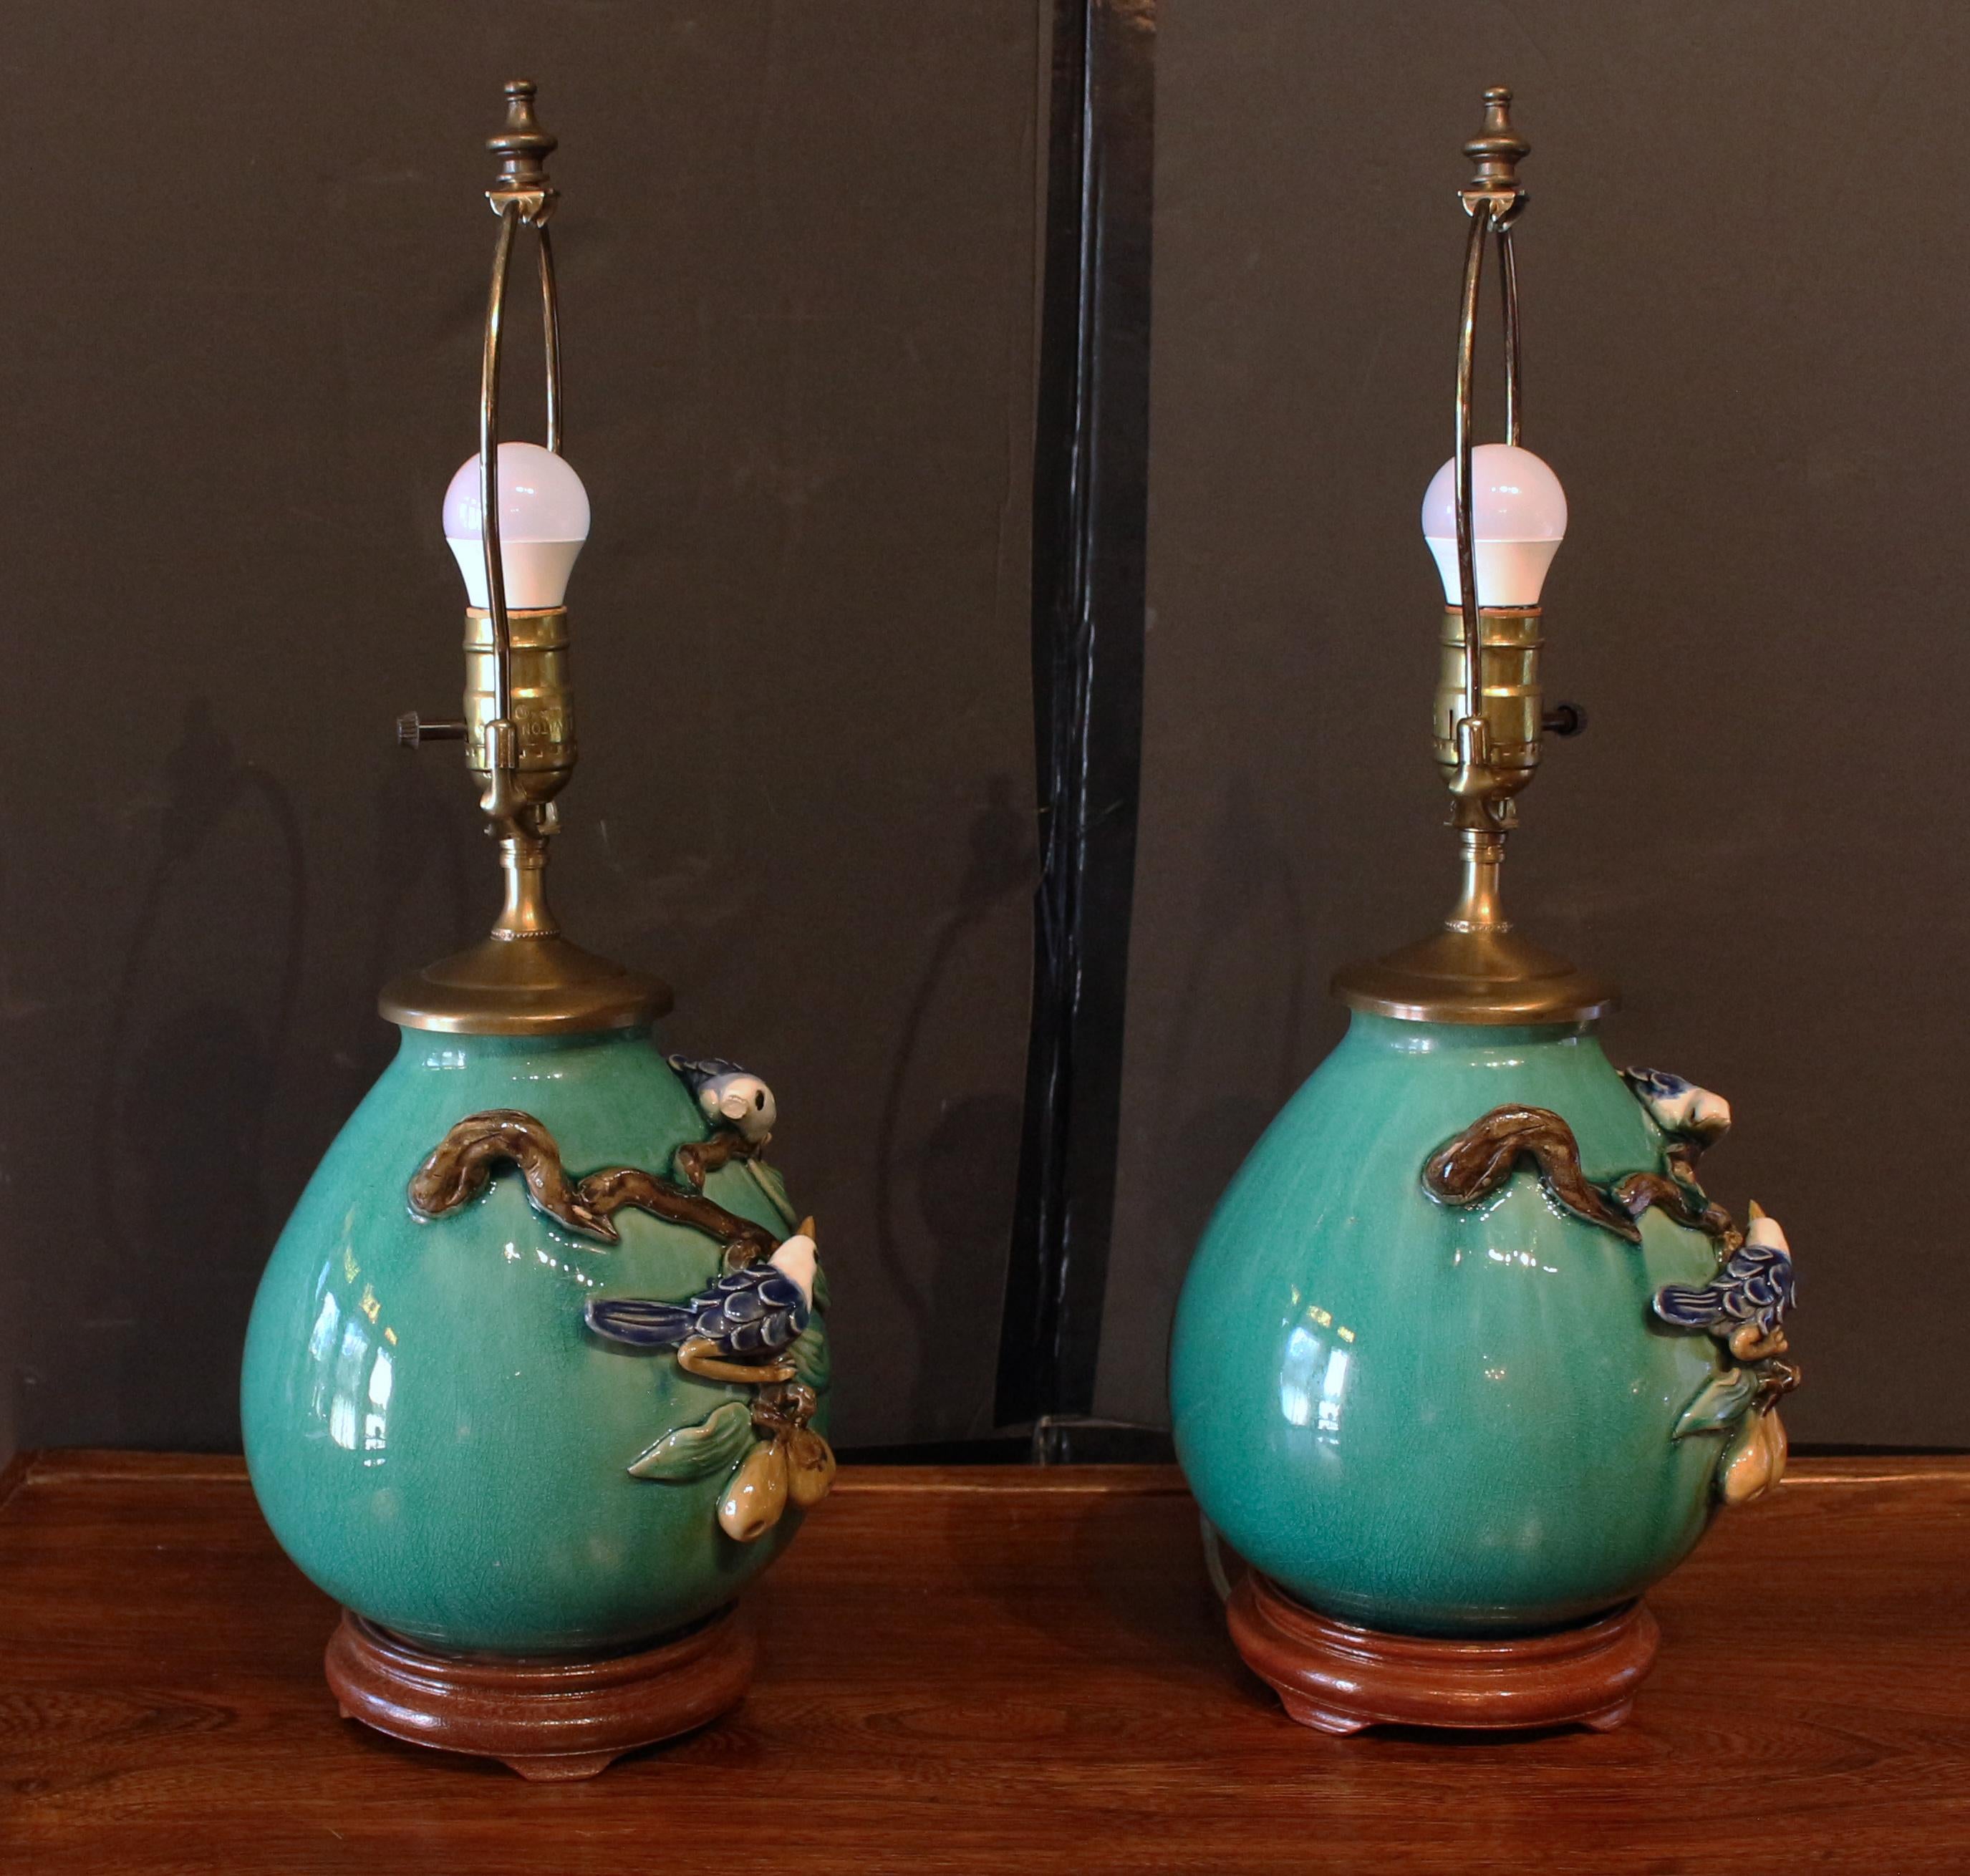 Aesthetic Movement Mid-20th Century Pair of Chinese Porcelain Lamps